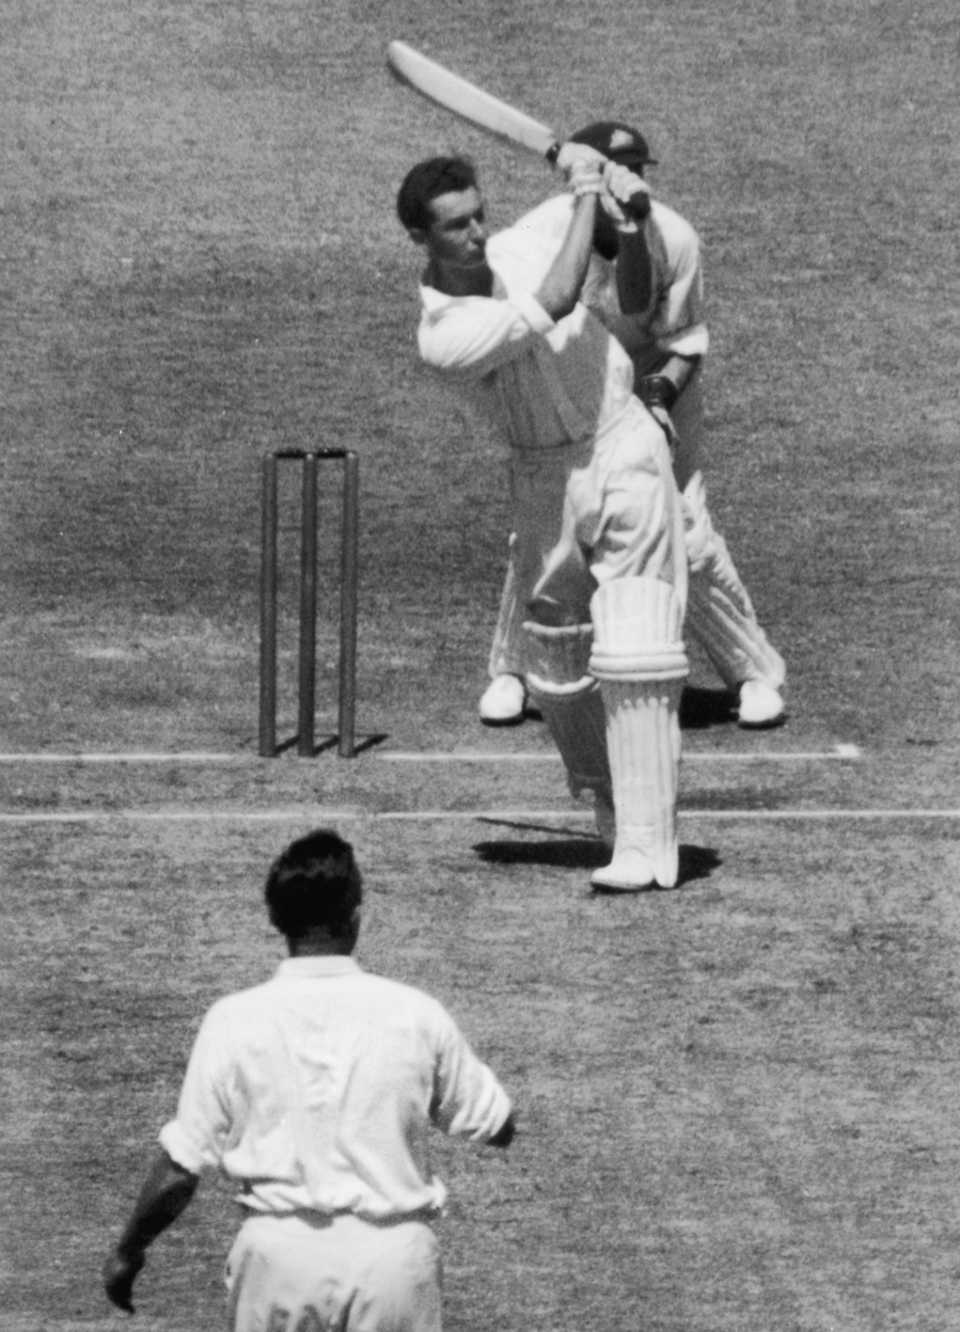 Reg Simpson batting during his innings of 156 not out at the MCG